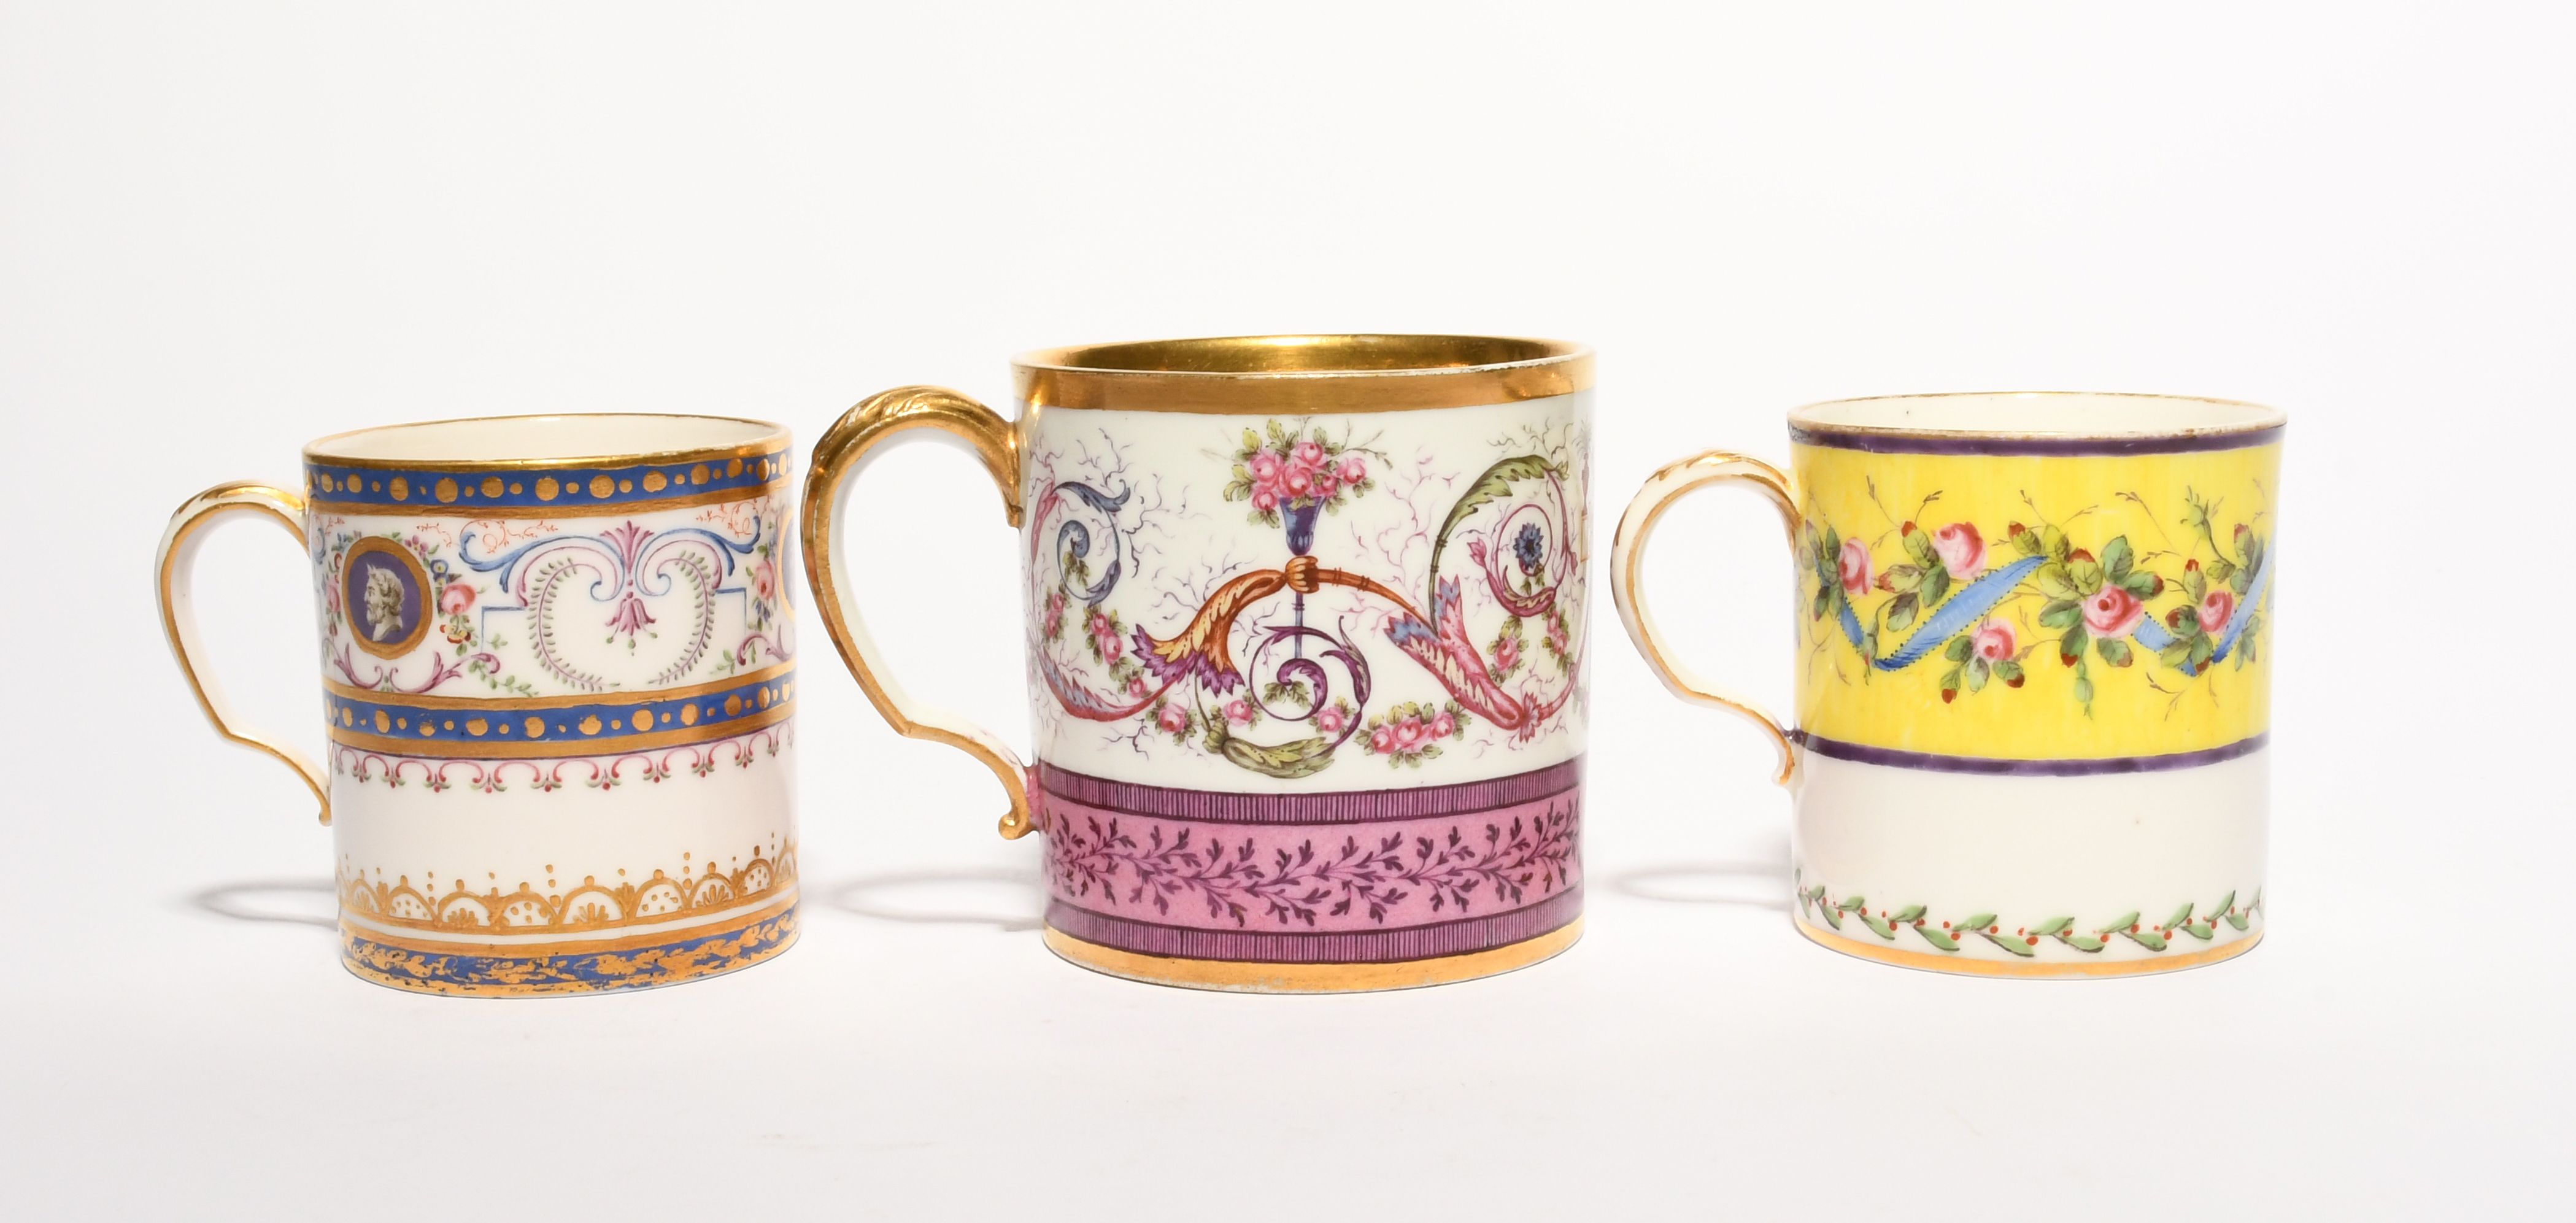 Three Sevres coffee cans (gobelets litron), c.1779-1800, the largest painted with pink roses - Image 3 of 4